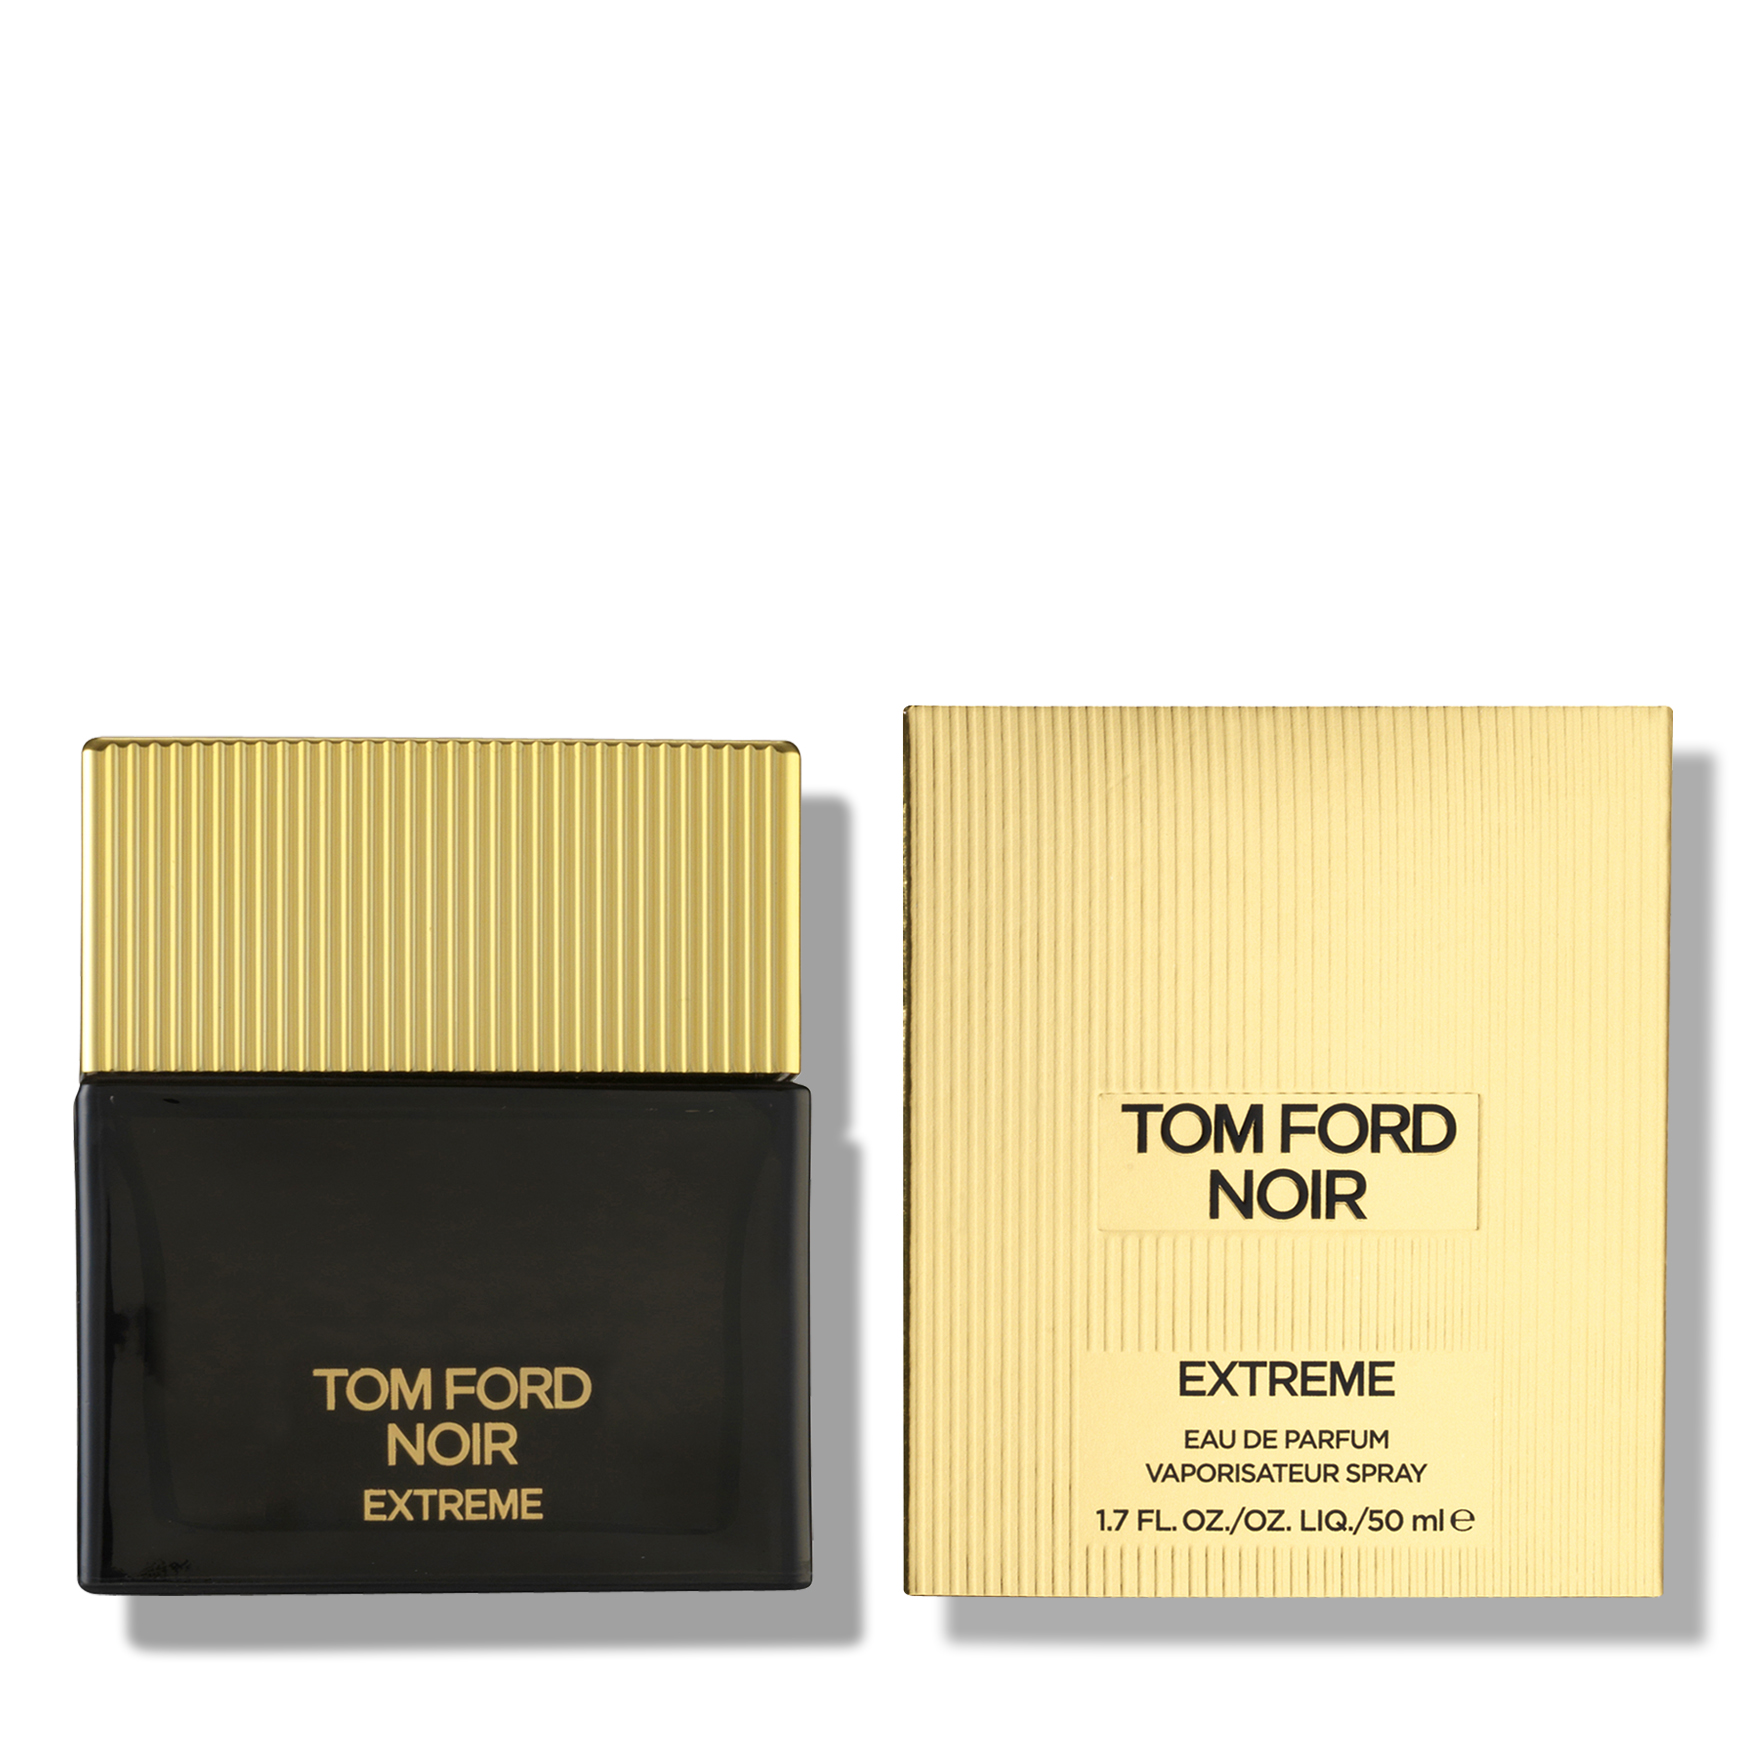 Tom Ford Noir Extreme | Space NK